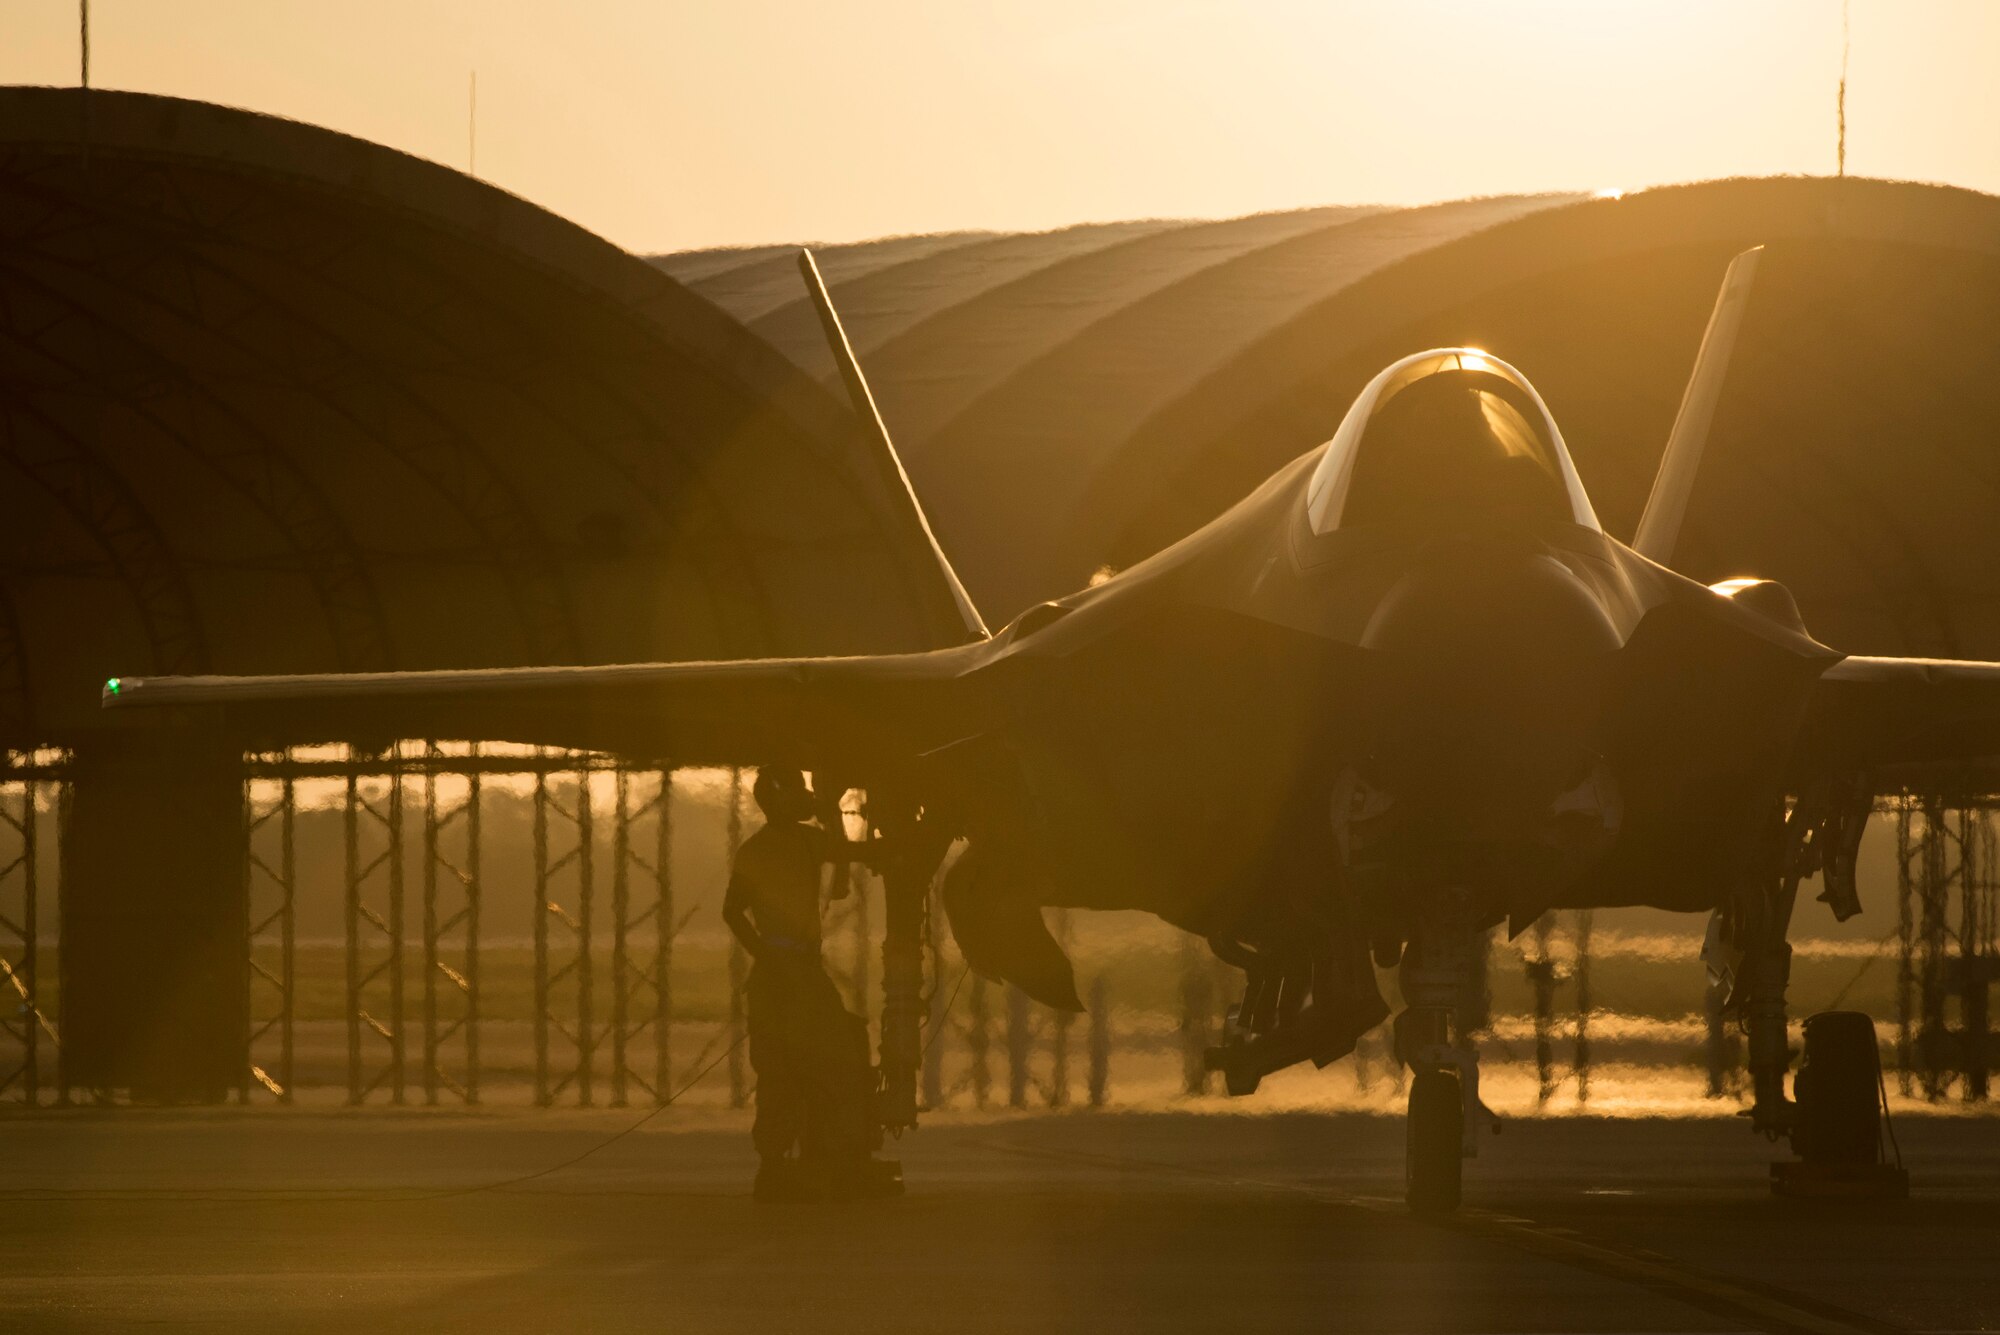 A 58th Aircraft Maintenance Unit crew chief prepares an F-35A for take off Aug. 2, 2016, at Eglin Air Force Base, Fla. The F-35A is the latest deployable fifth generation aircraft capable of providing air superiority, interdiction, suppression of enemy air defenses and close air support as well as great command and control functions through fused sensors, and will provide pilots with unprecedented situational awareness of the battle space. (U.S. Air Force photo by Senior Airman Stormy Archer) 